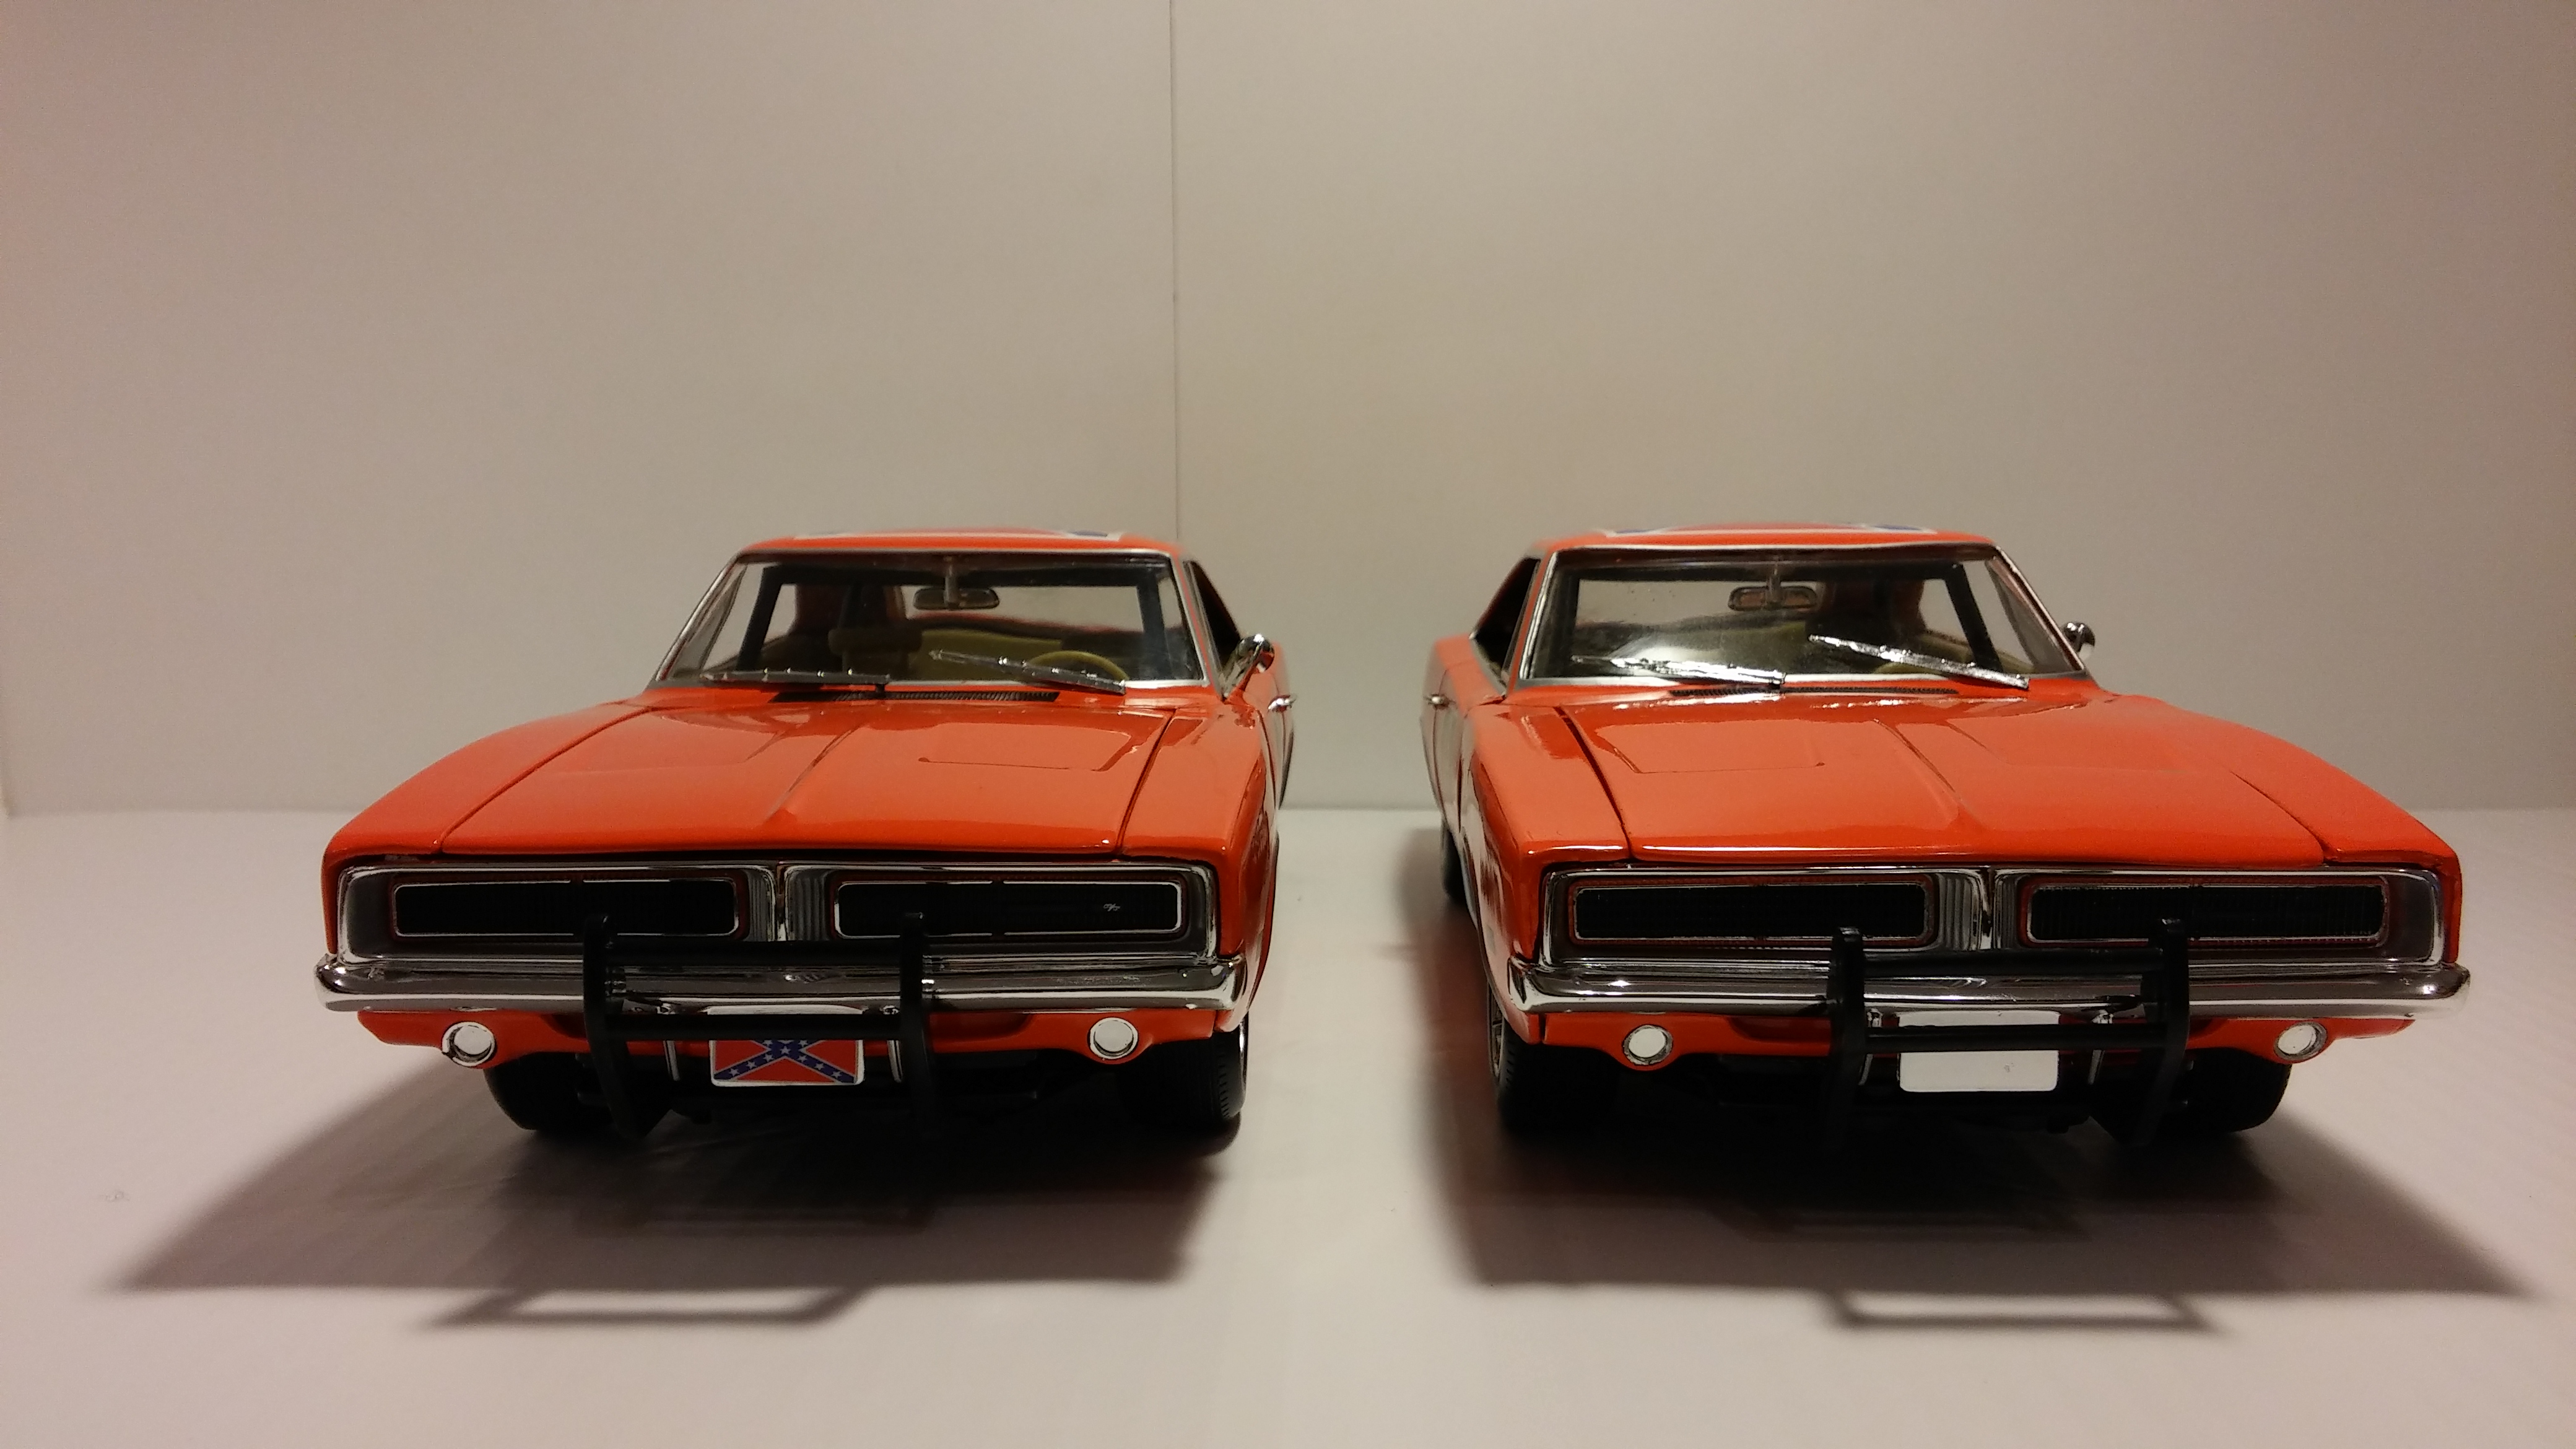 Page 1 18. Dodge Charger 1969 r/t General Lee. Dodge Charger 1969 General Lee. 1:18 Додж Чарджер 1969. Додж Чарджер 1969 генерал ли.